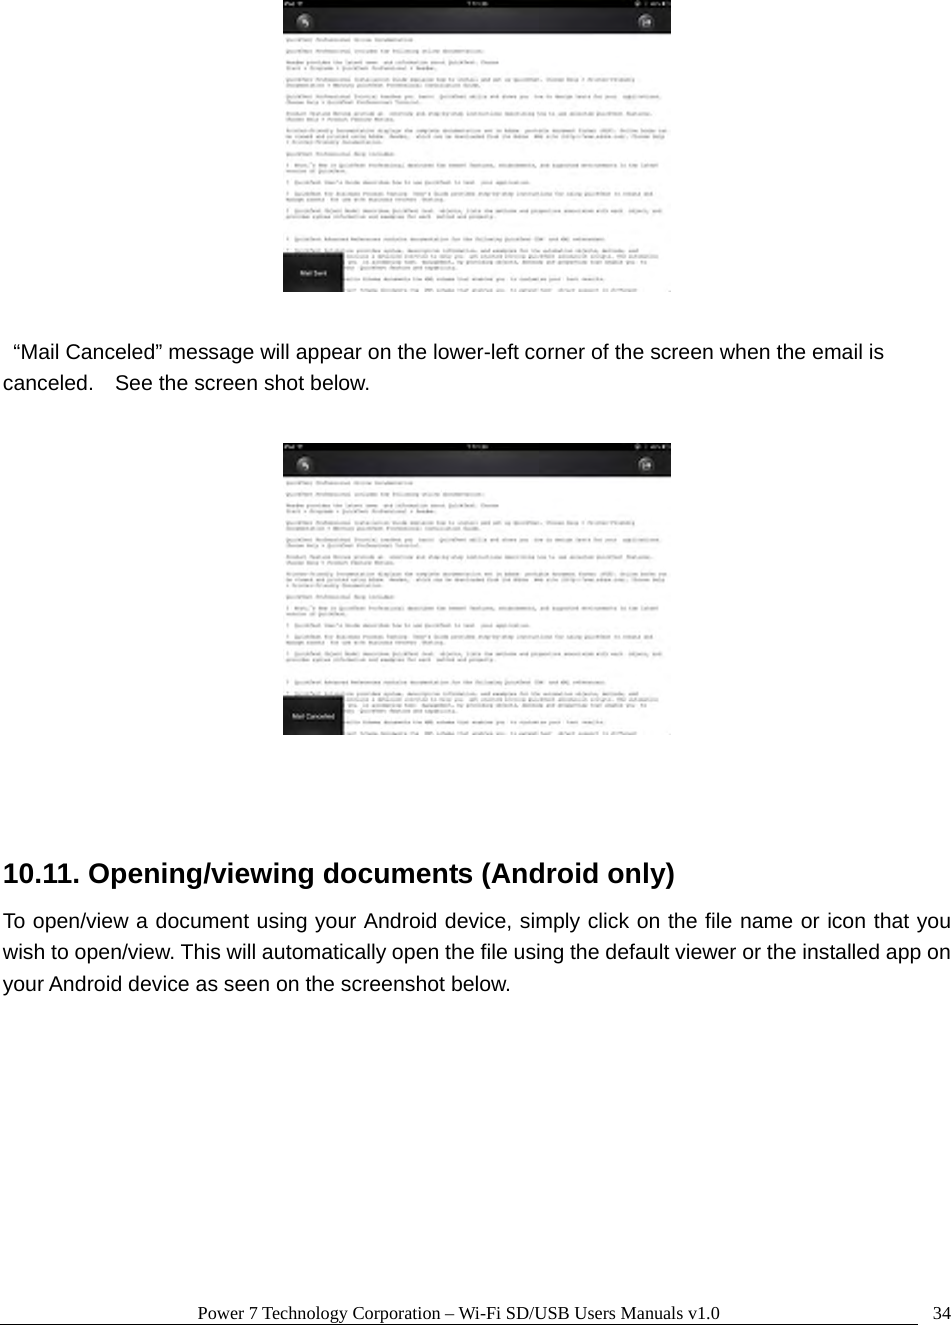 Power 7 Technology Corporation – Wi-Fi SD/USB Users Manuals v1.0  34    “Mail Canceled” message will appear on the lower-left corner of the screen when the email is canceled.    See the screen shot below.     10.11. Opening/viewing documents (Android only) To open/view a document using your Android device, simply click on the file name or icon that you wish to open/view. This will automatically open the file using the default viewer or the installed app on your Android device as seen on the screenshot below.  